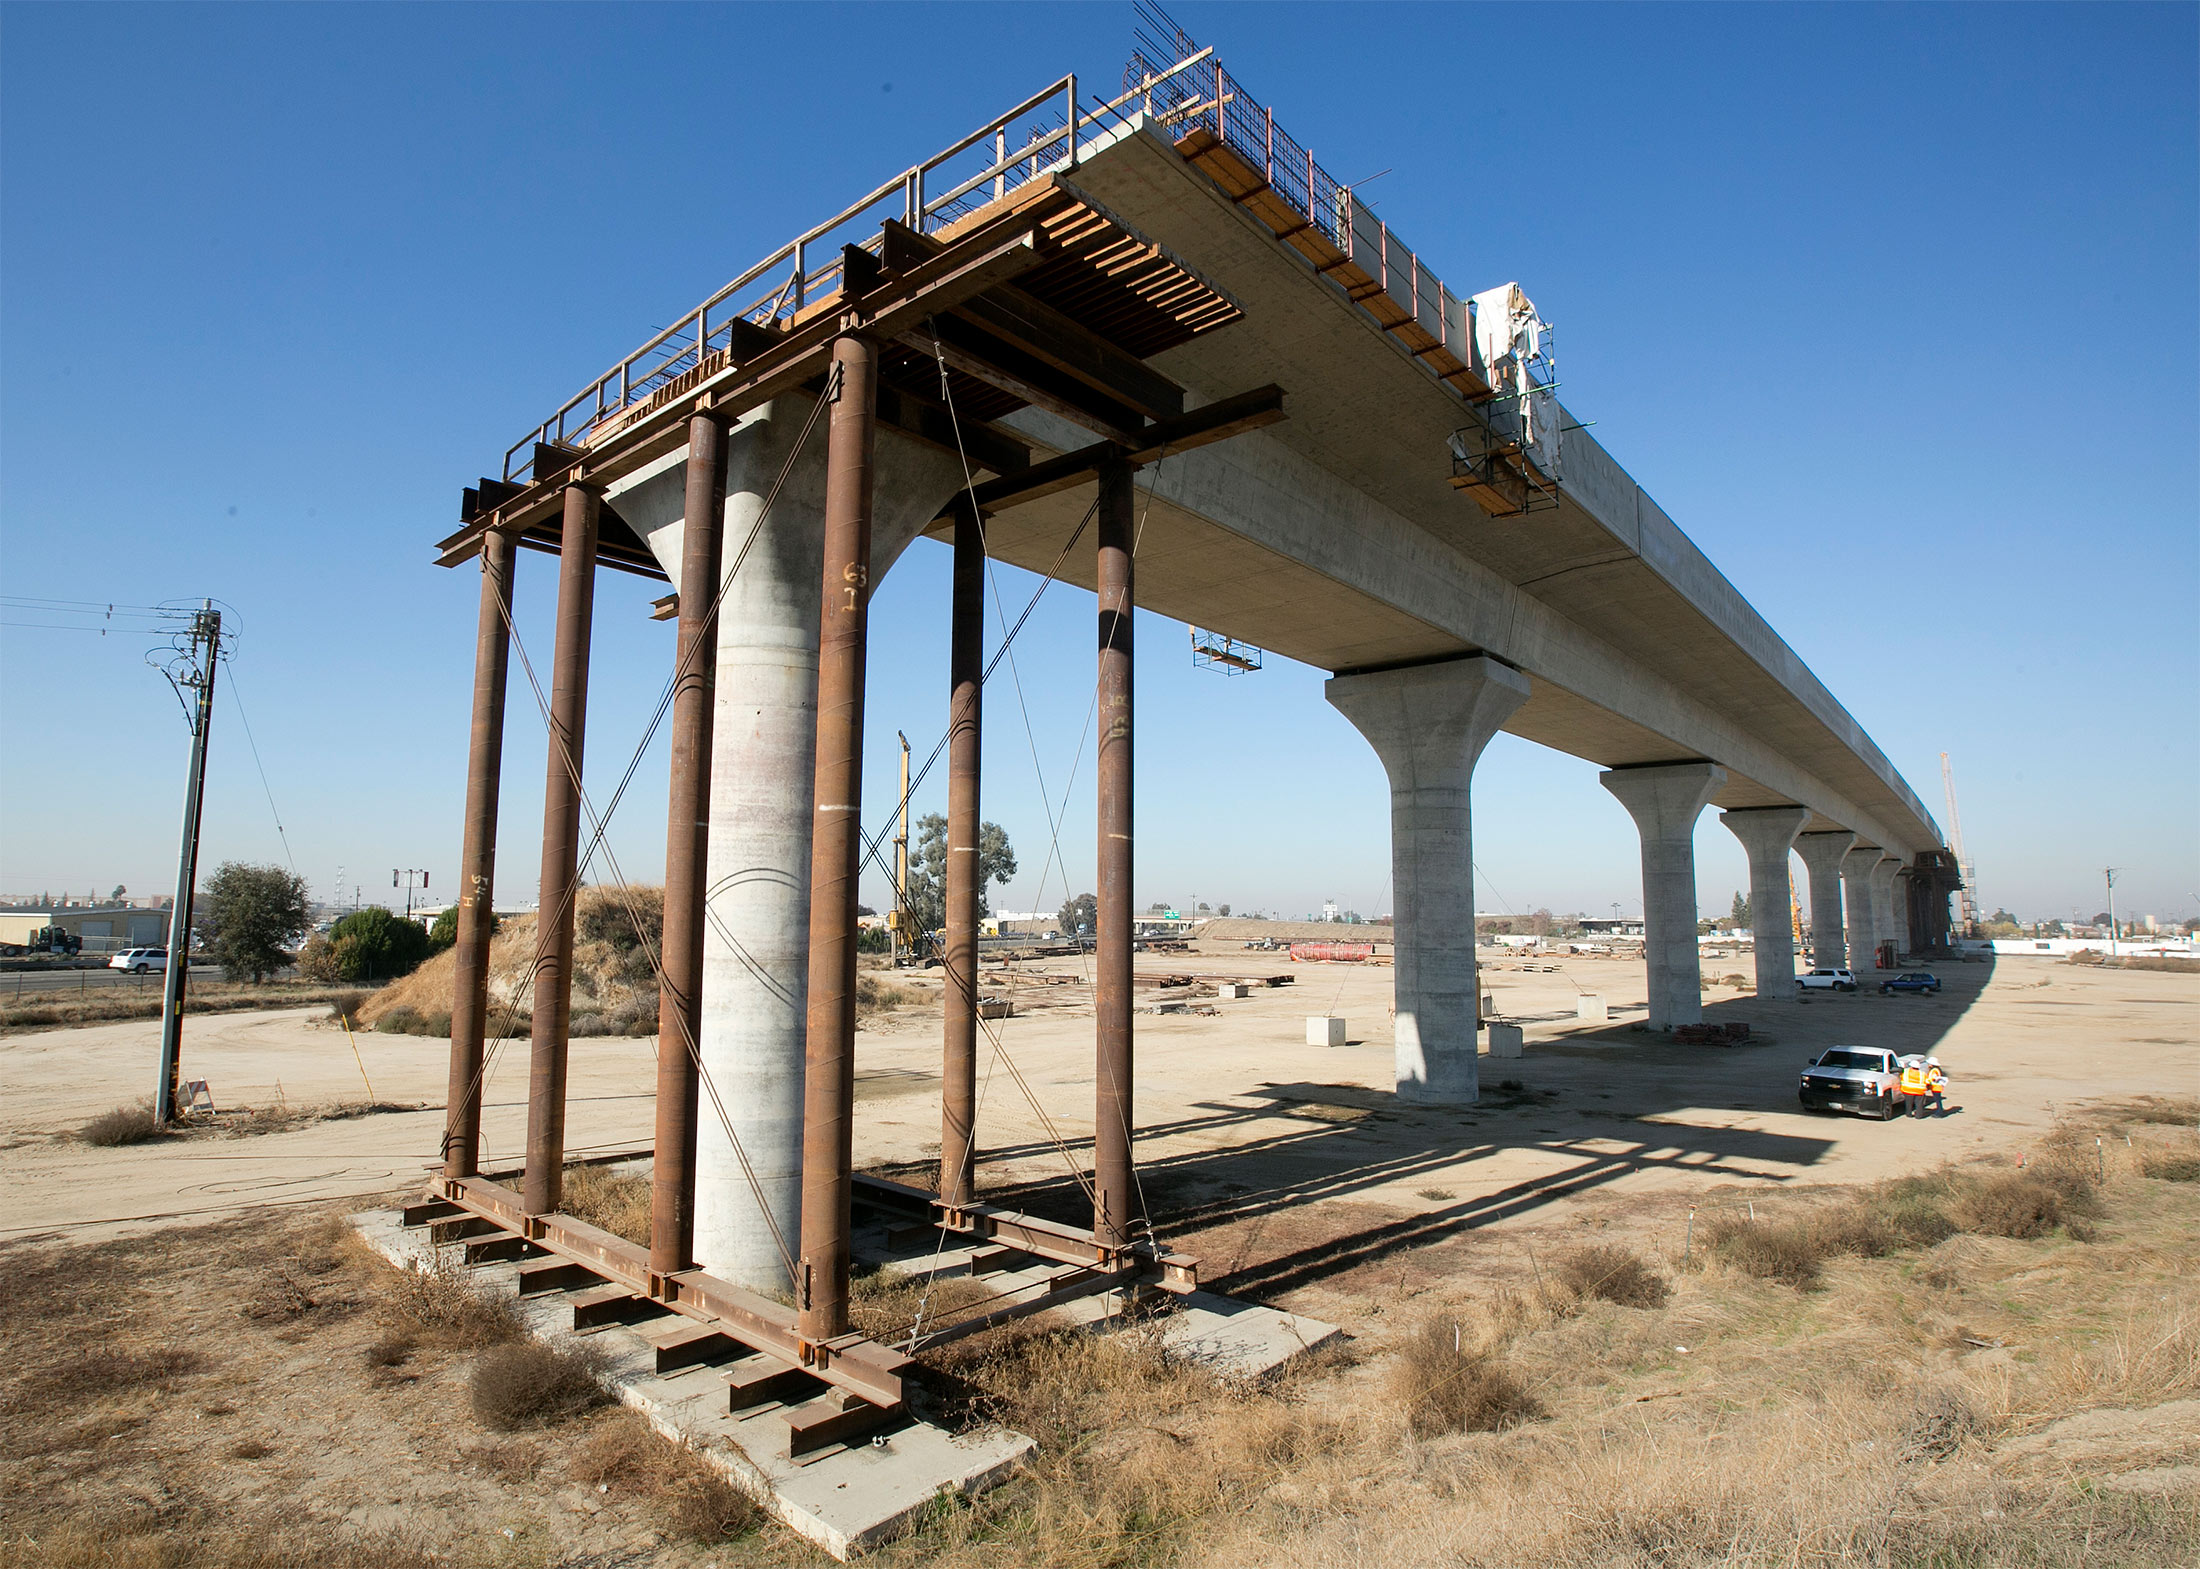 An elevated section&nbsp;of the high-speed rail under construction in Fresno, Calif. on Dec. 6, 2017.